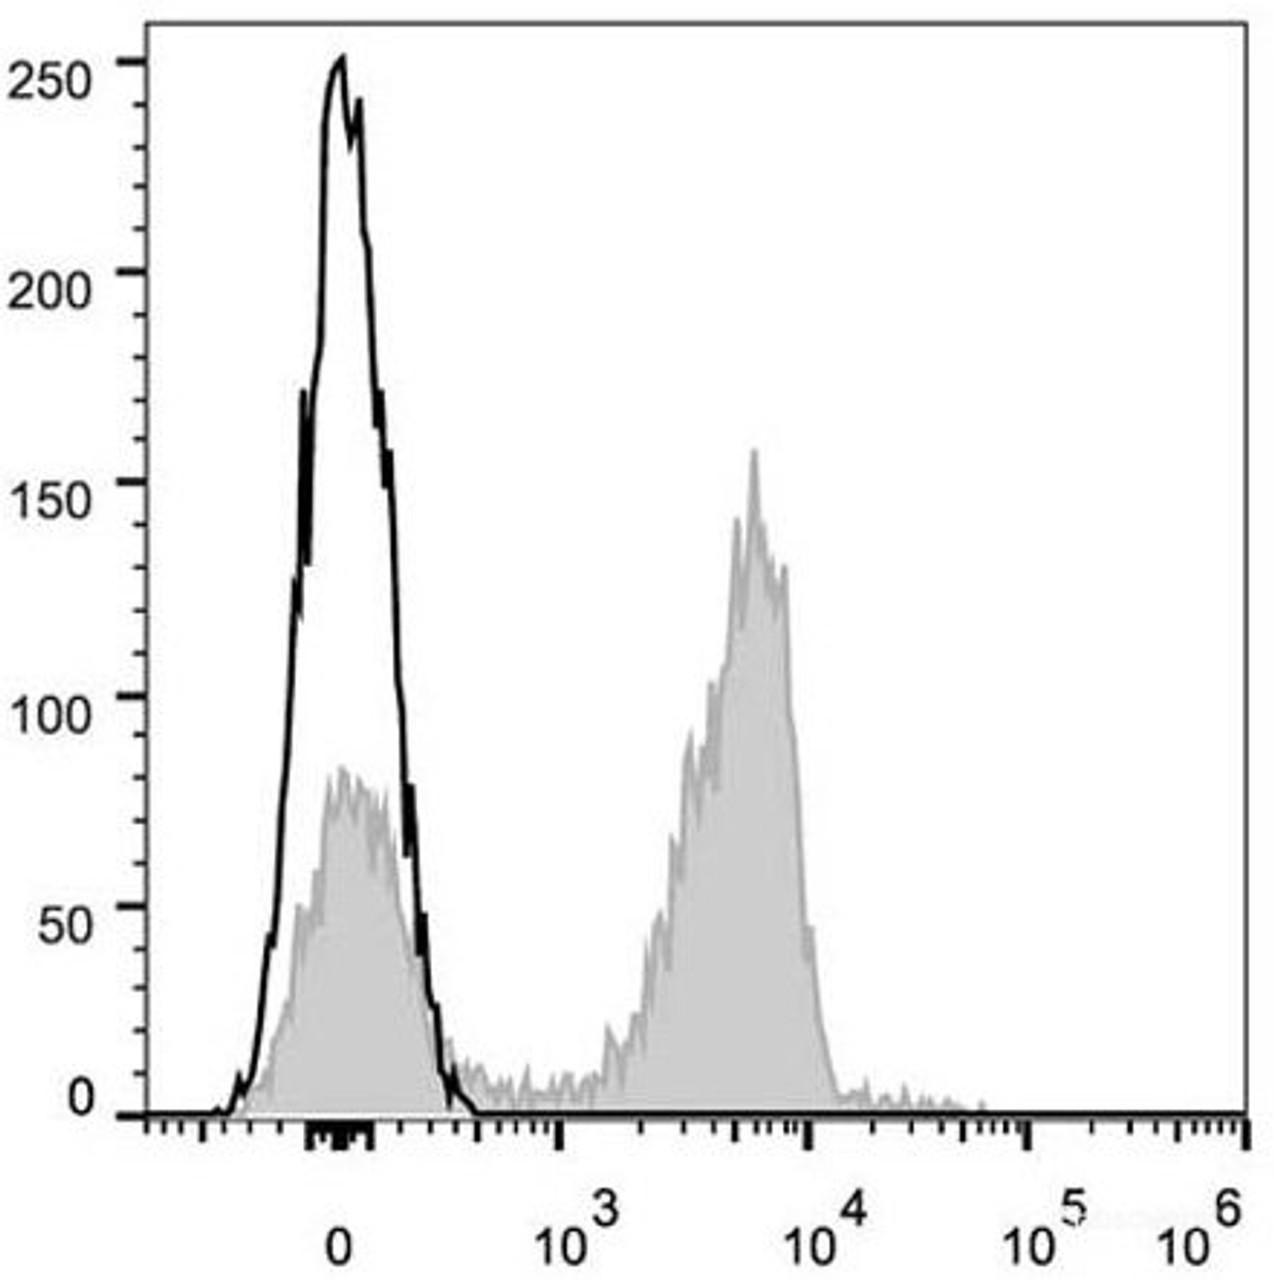 C57BL/6 murine splenocytes are stained with AF647 Anti-Mouse CD3 Antibody[Used at .2 μg/1<sup>6</sup> cells dilution](filled gray histogram). Unstained lymphocytes (empty black histogram) are used as control.